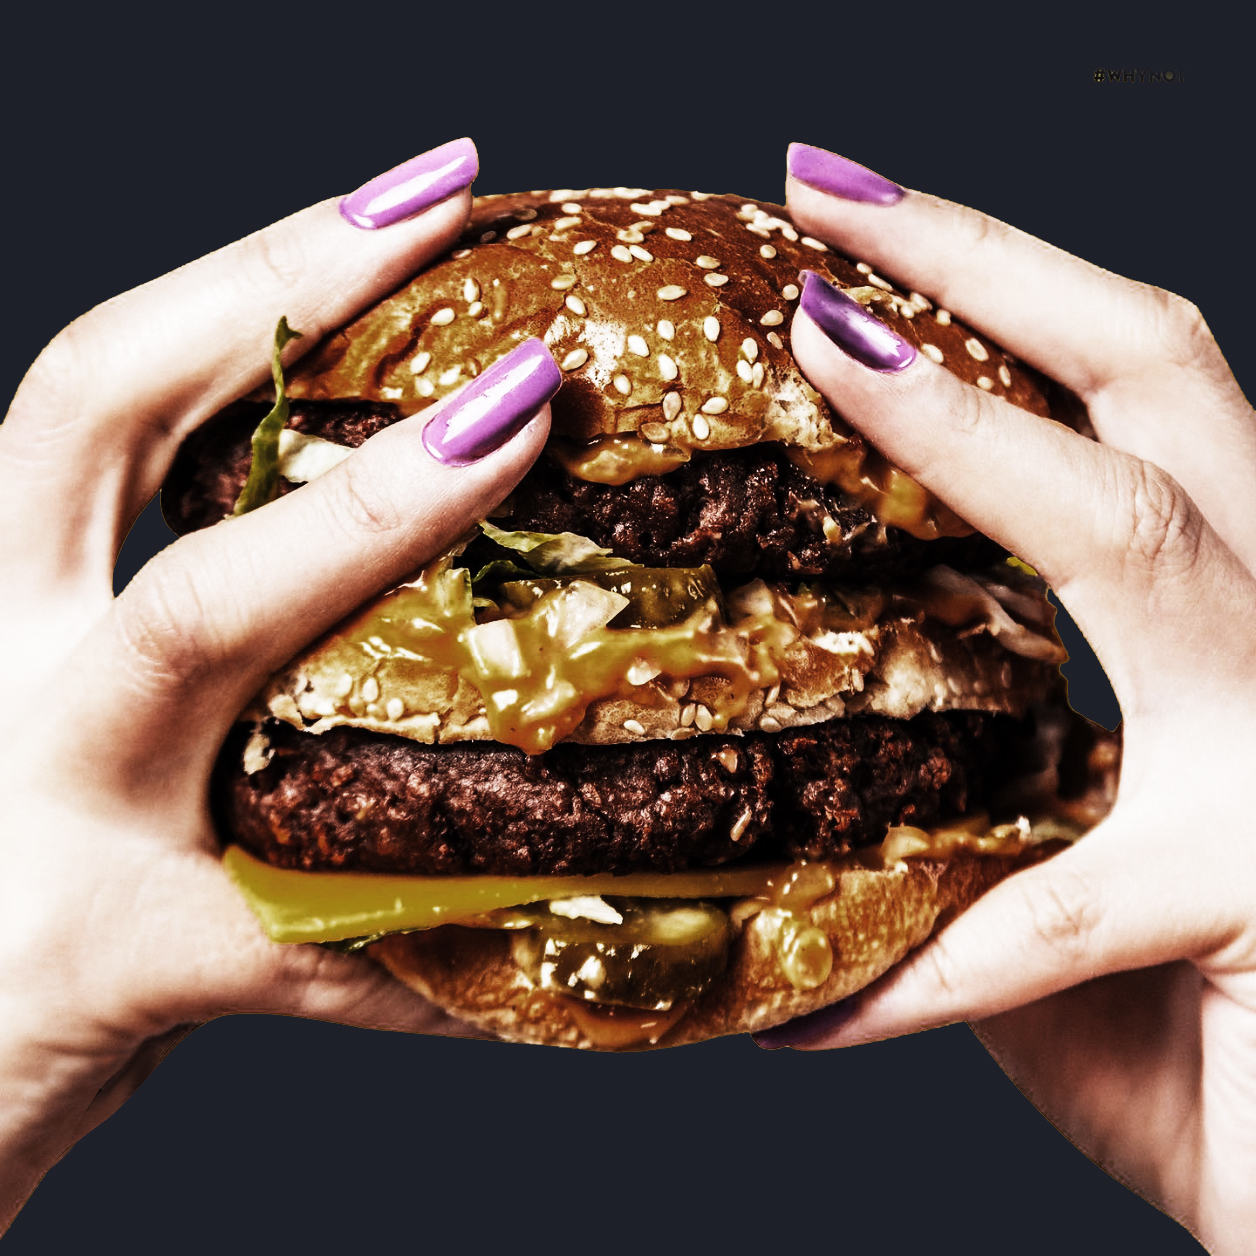 Closeup of two hands holding a large, double-stacked cheeseburger